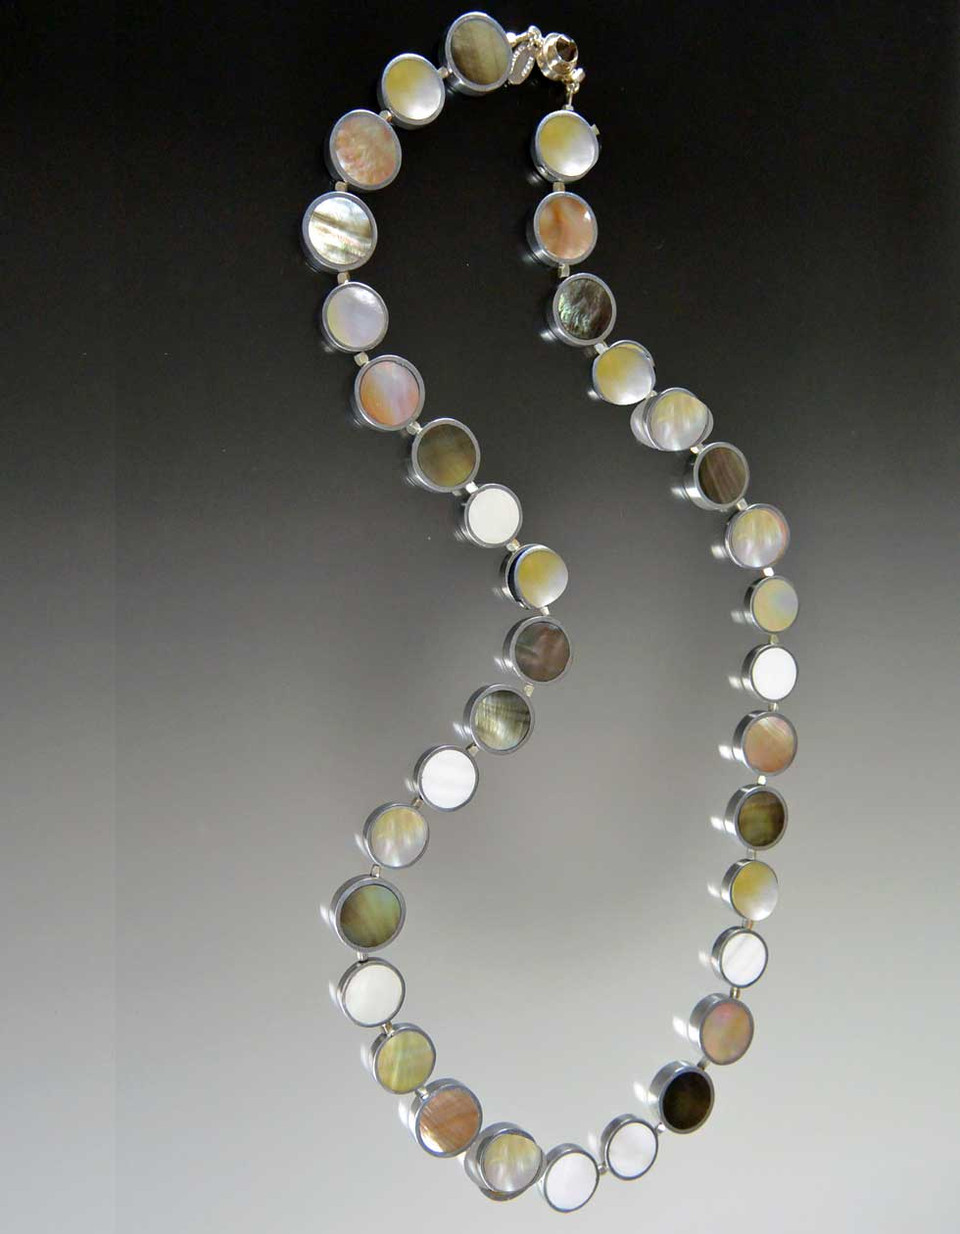 Charles Mother of Pearl Shell Necklace – BASTIAN KNTWR